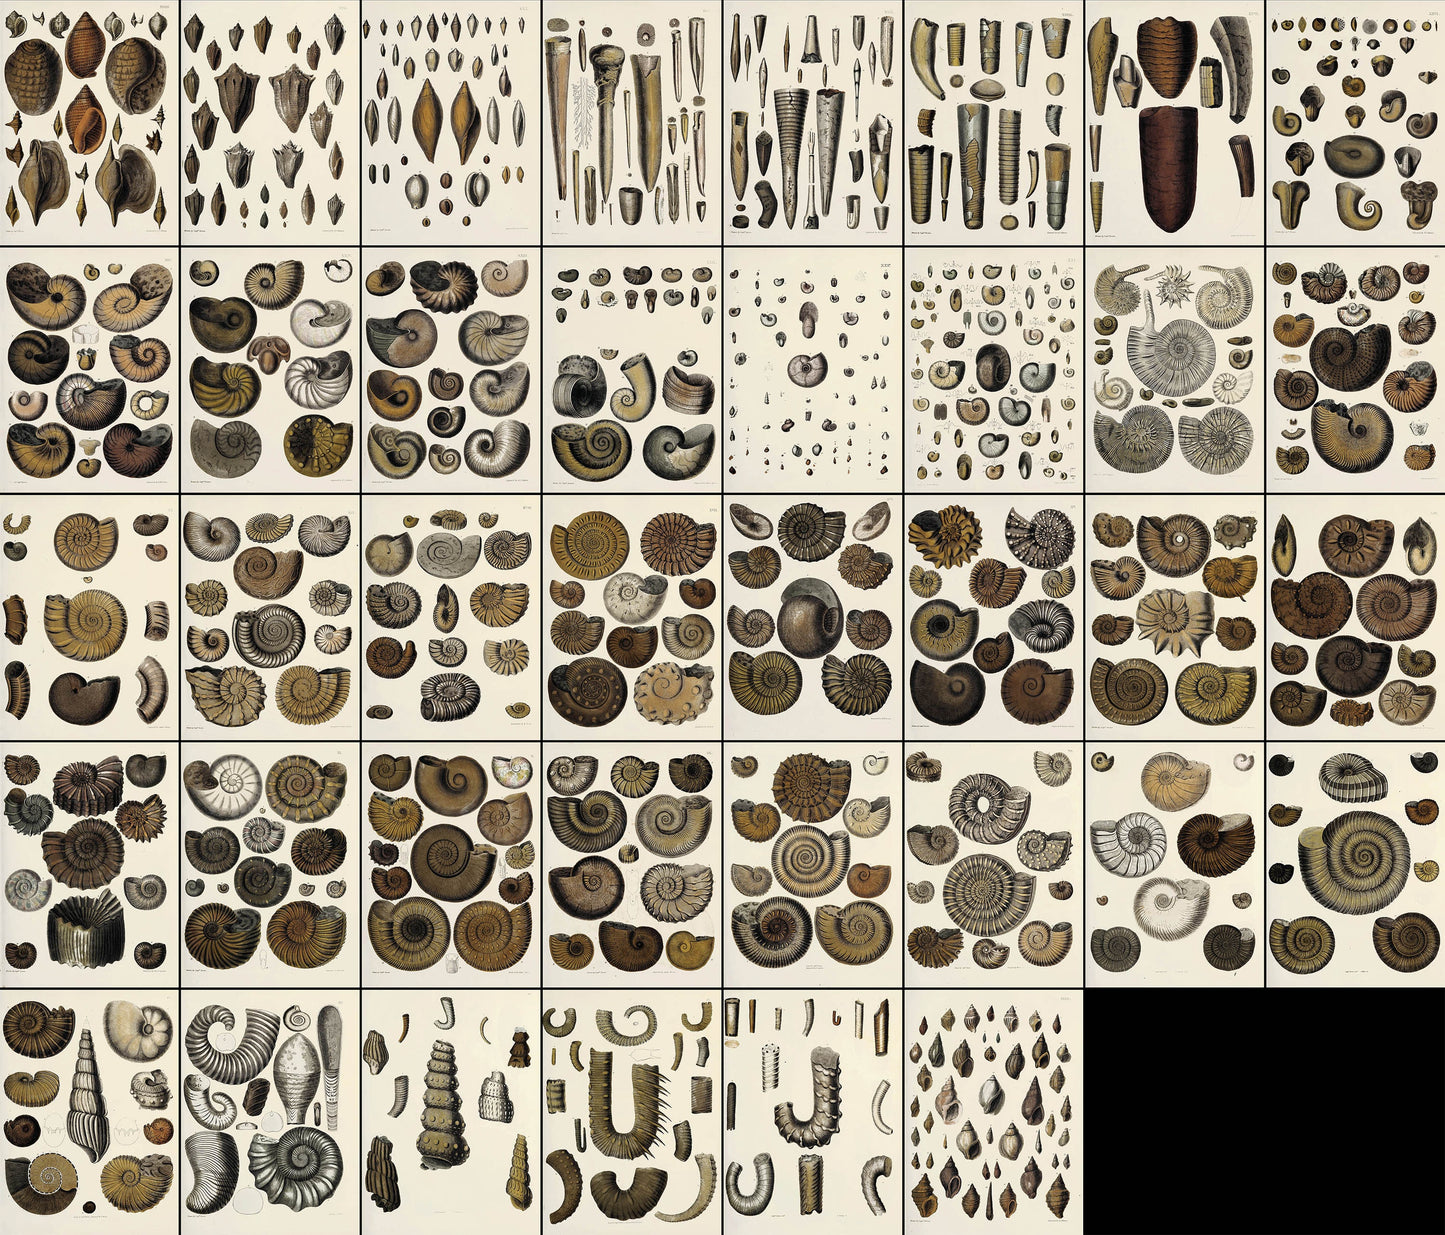 Fossil Conchology of Great Britain & Ireland Set 1 [38 Images]